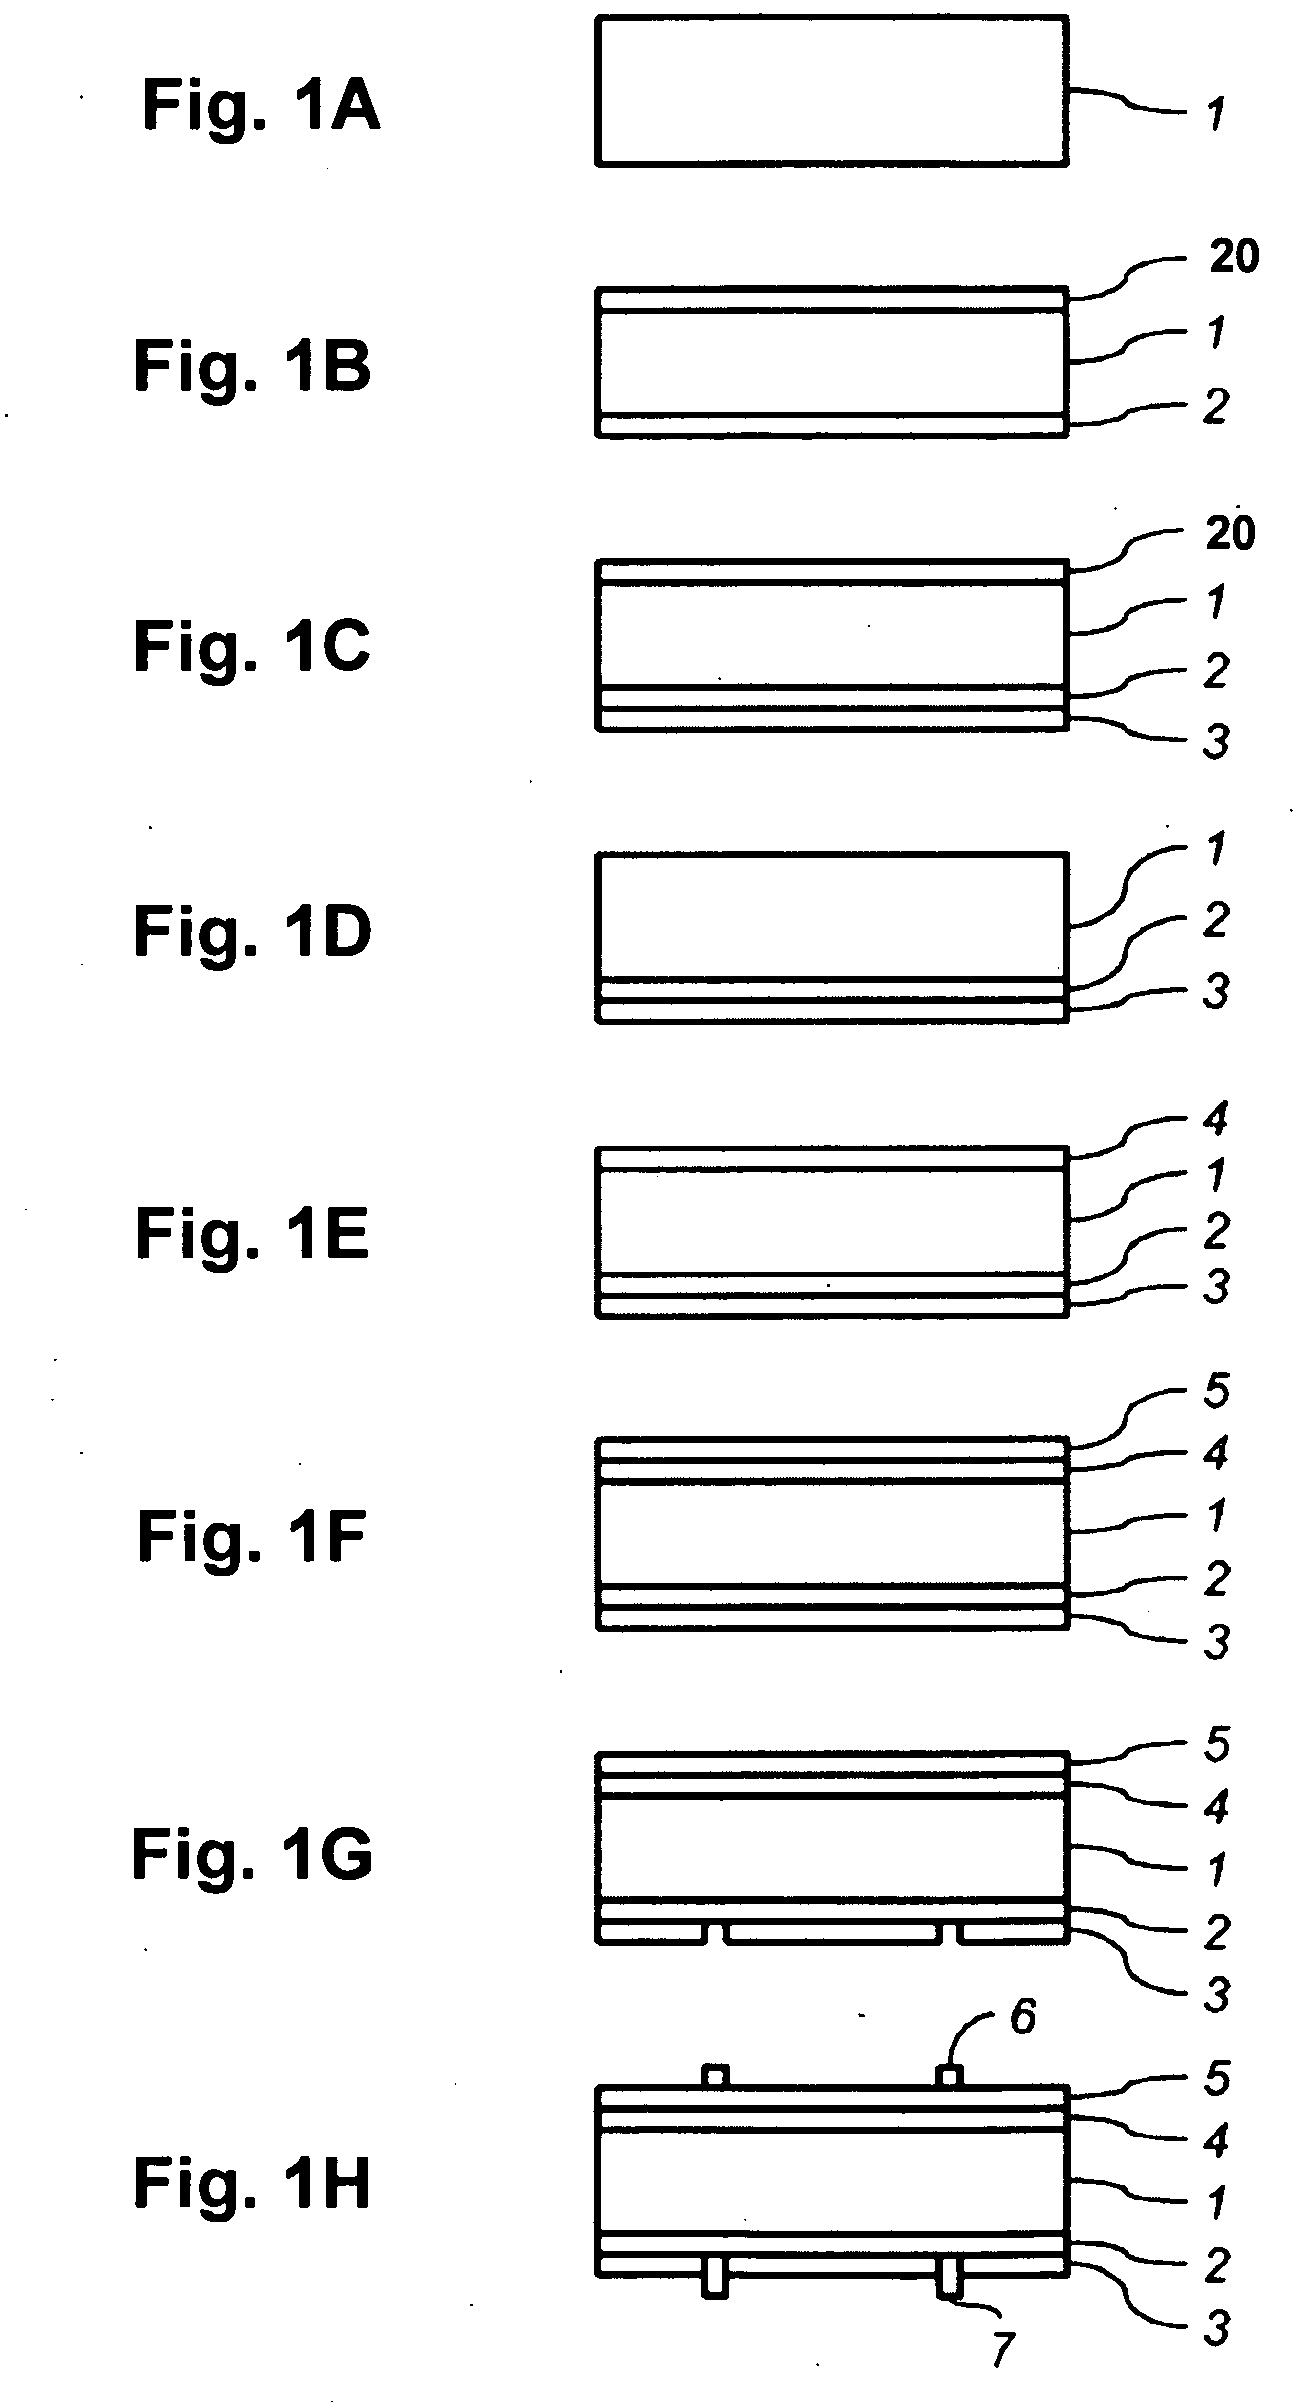 Method of Manufacturing N-Type Multicrystalline Silicon Solar Cells